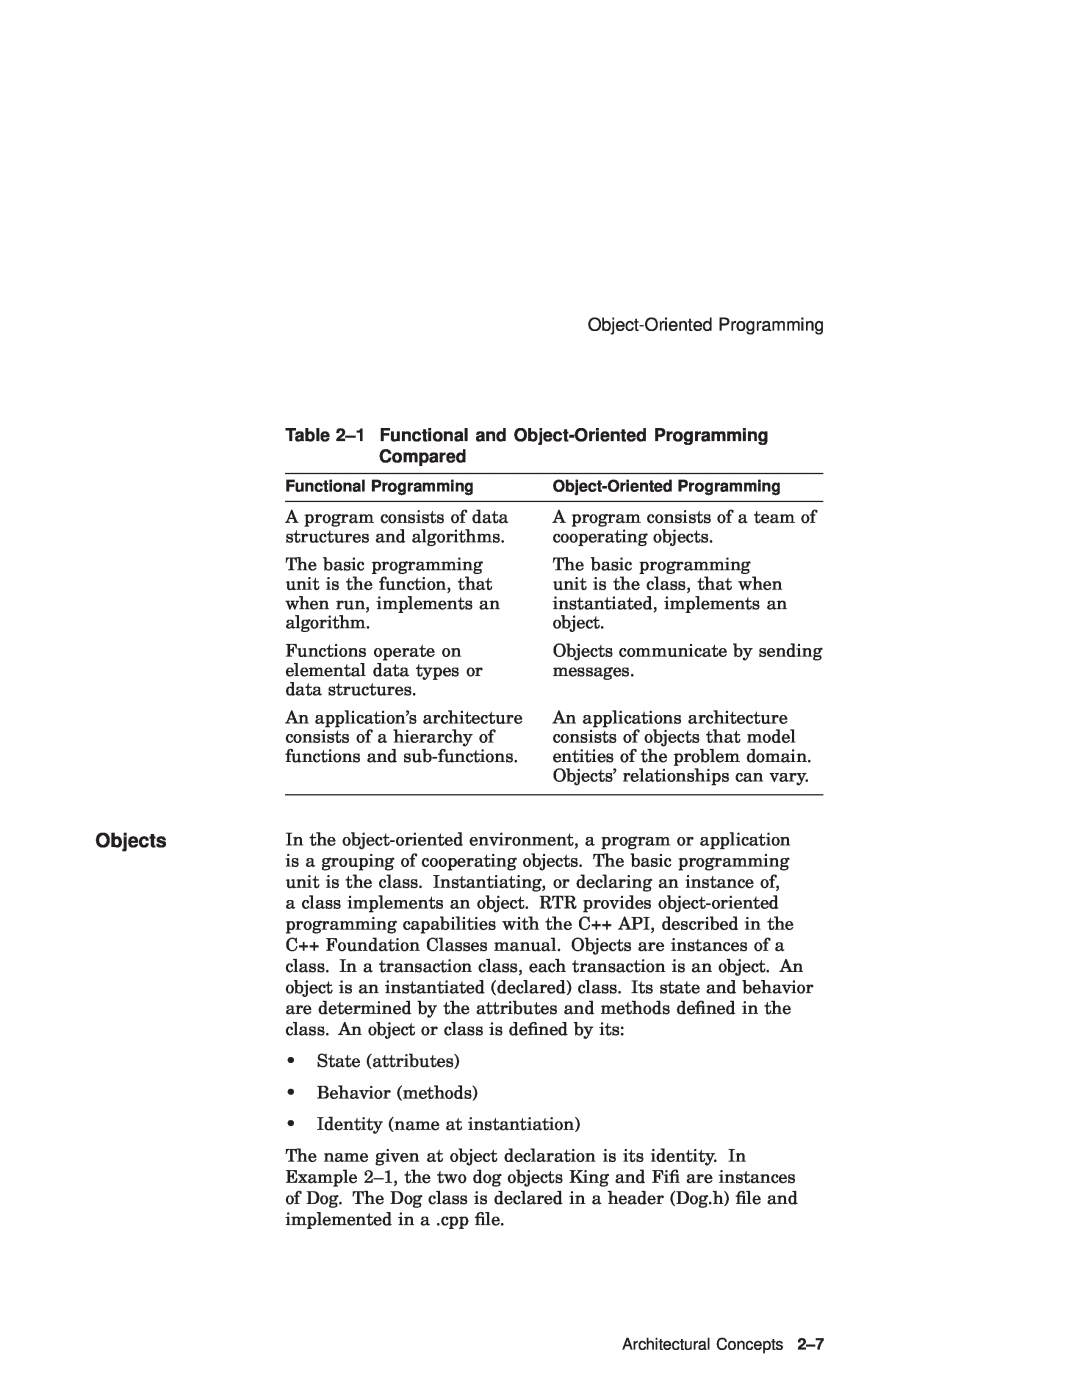 Compaq Reliable Transaction Router manual Objects, 1 Functional and Object-Oriented Programming Compared 